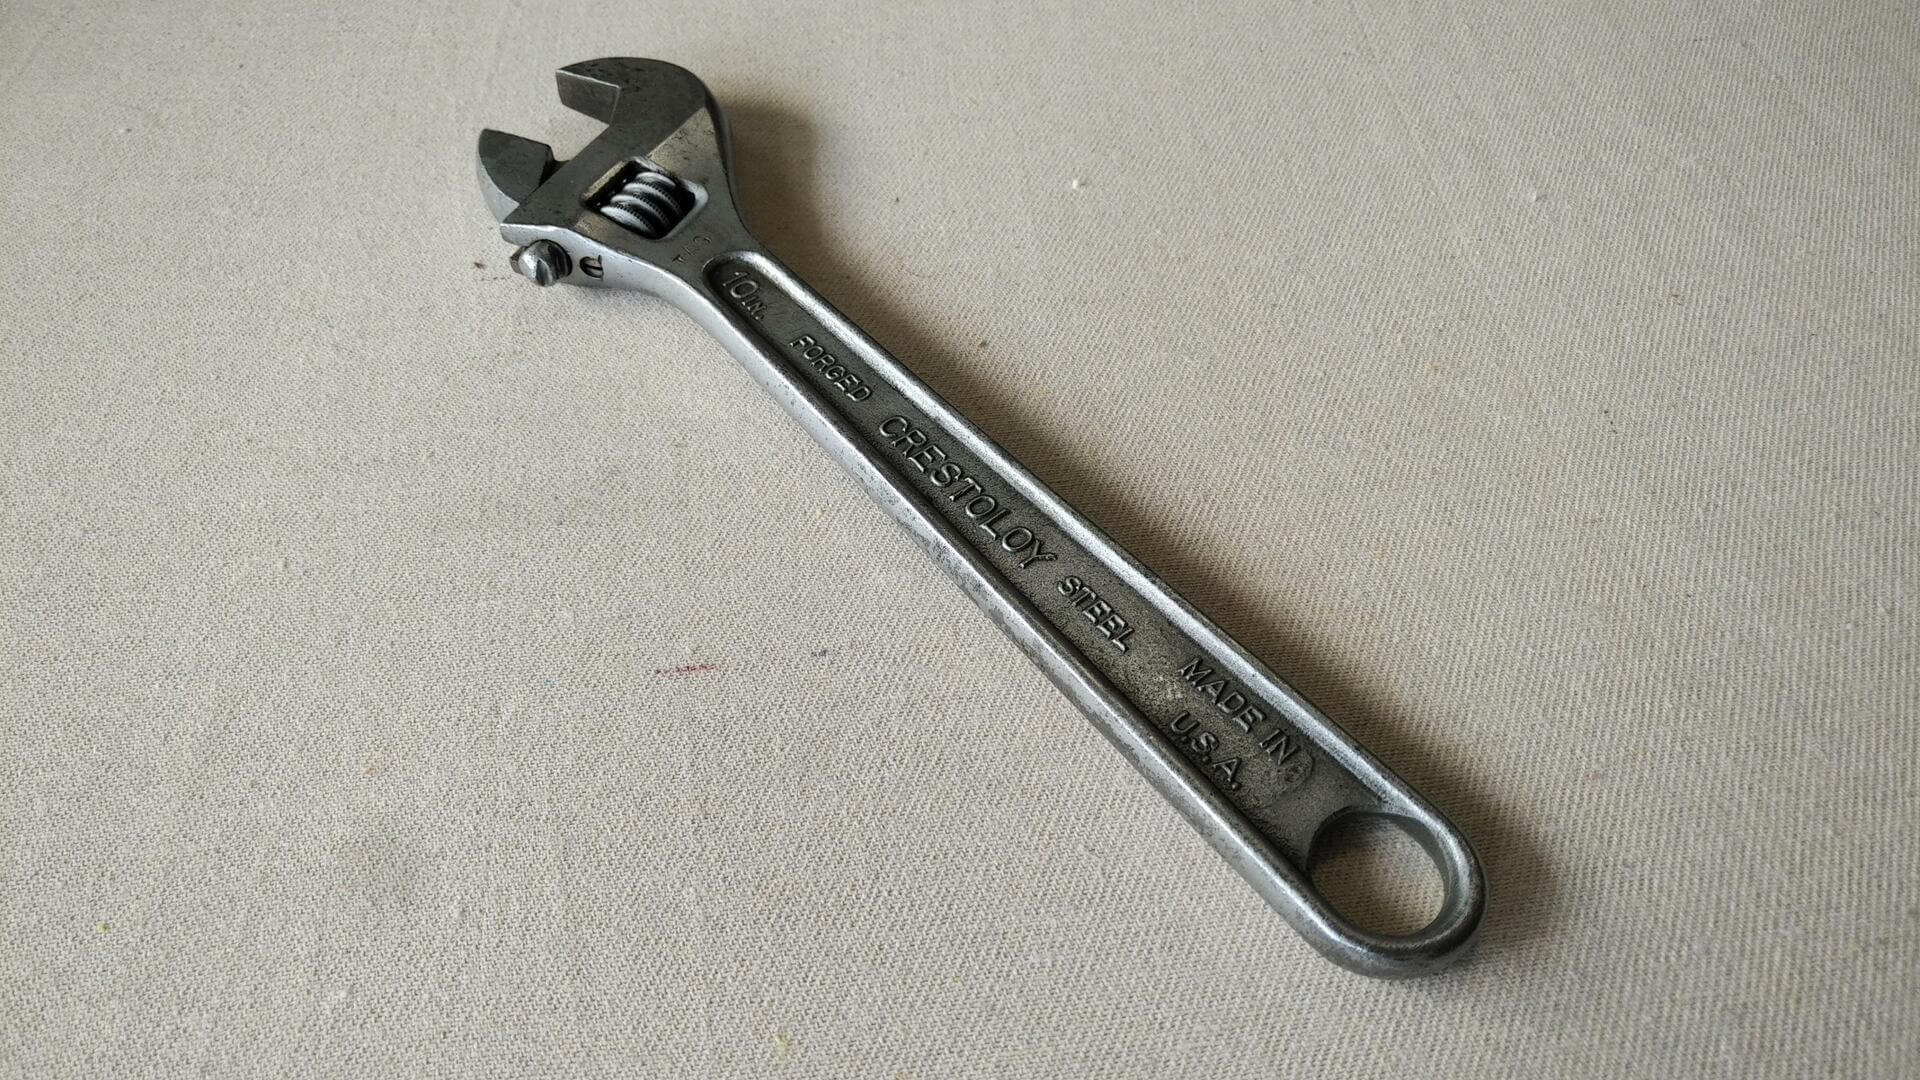 Antique Crestoloy adjustable wrench 10" by Crescent Tool Company from Jamestown, NY. Vintage made in USA collectible automotive and plumbing hand tools